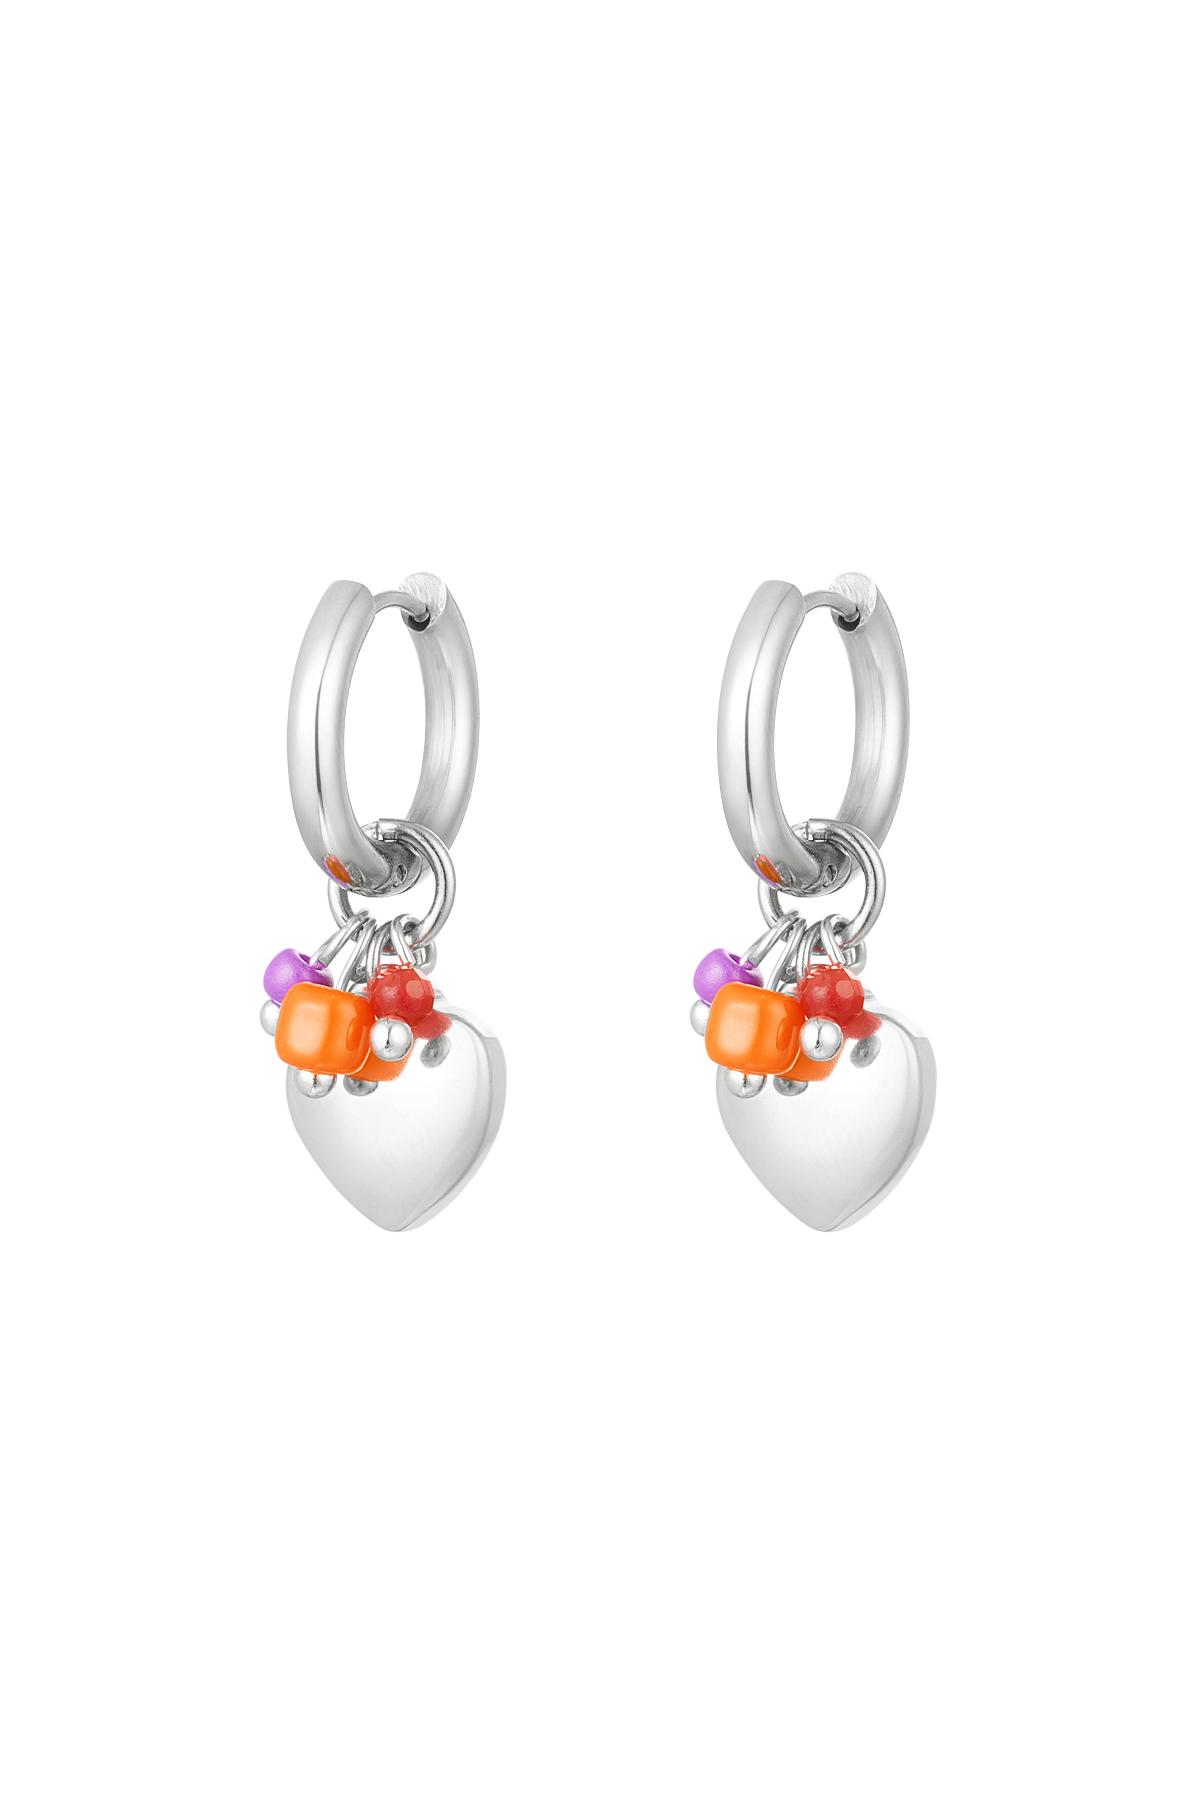 Earrings heart with beads Silver Stainless Steel 